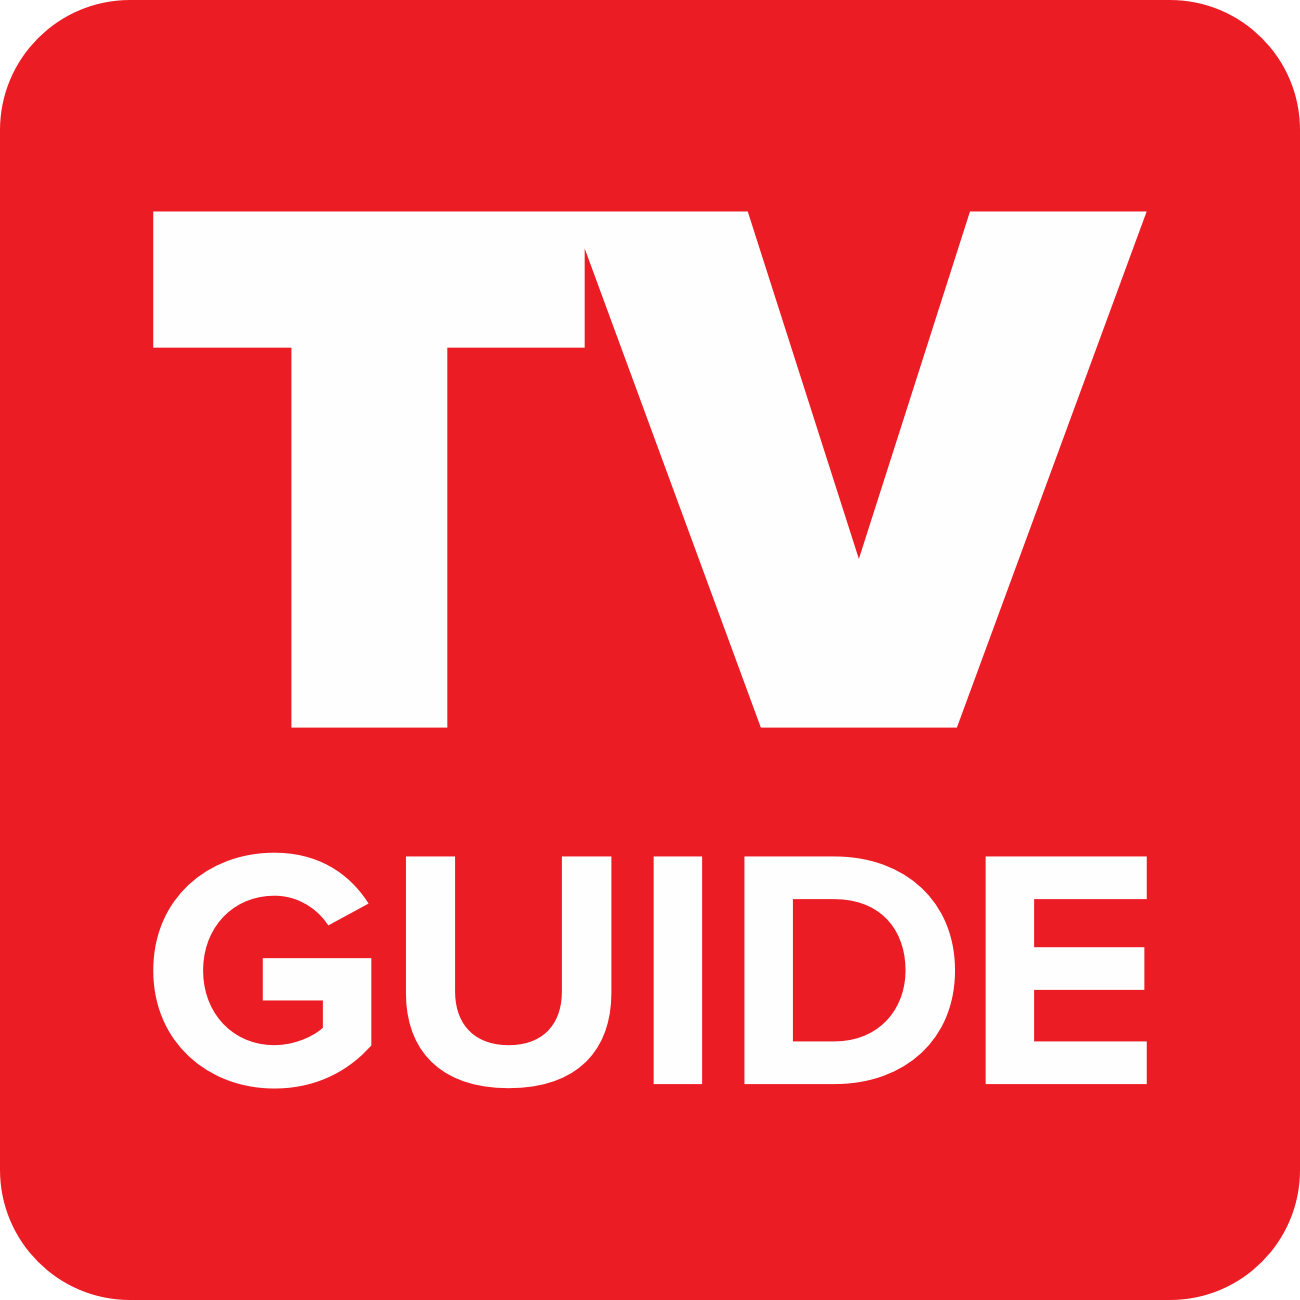 American Cable Television Company Logo - TV Guide, TV Listings, Online Videos, Entertainment News and ...